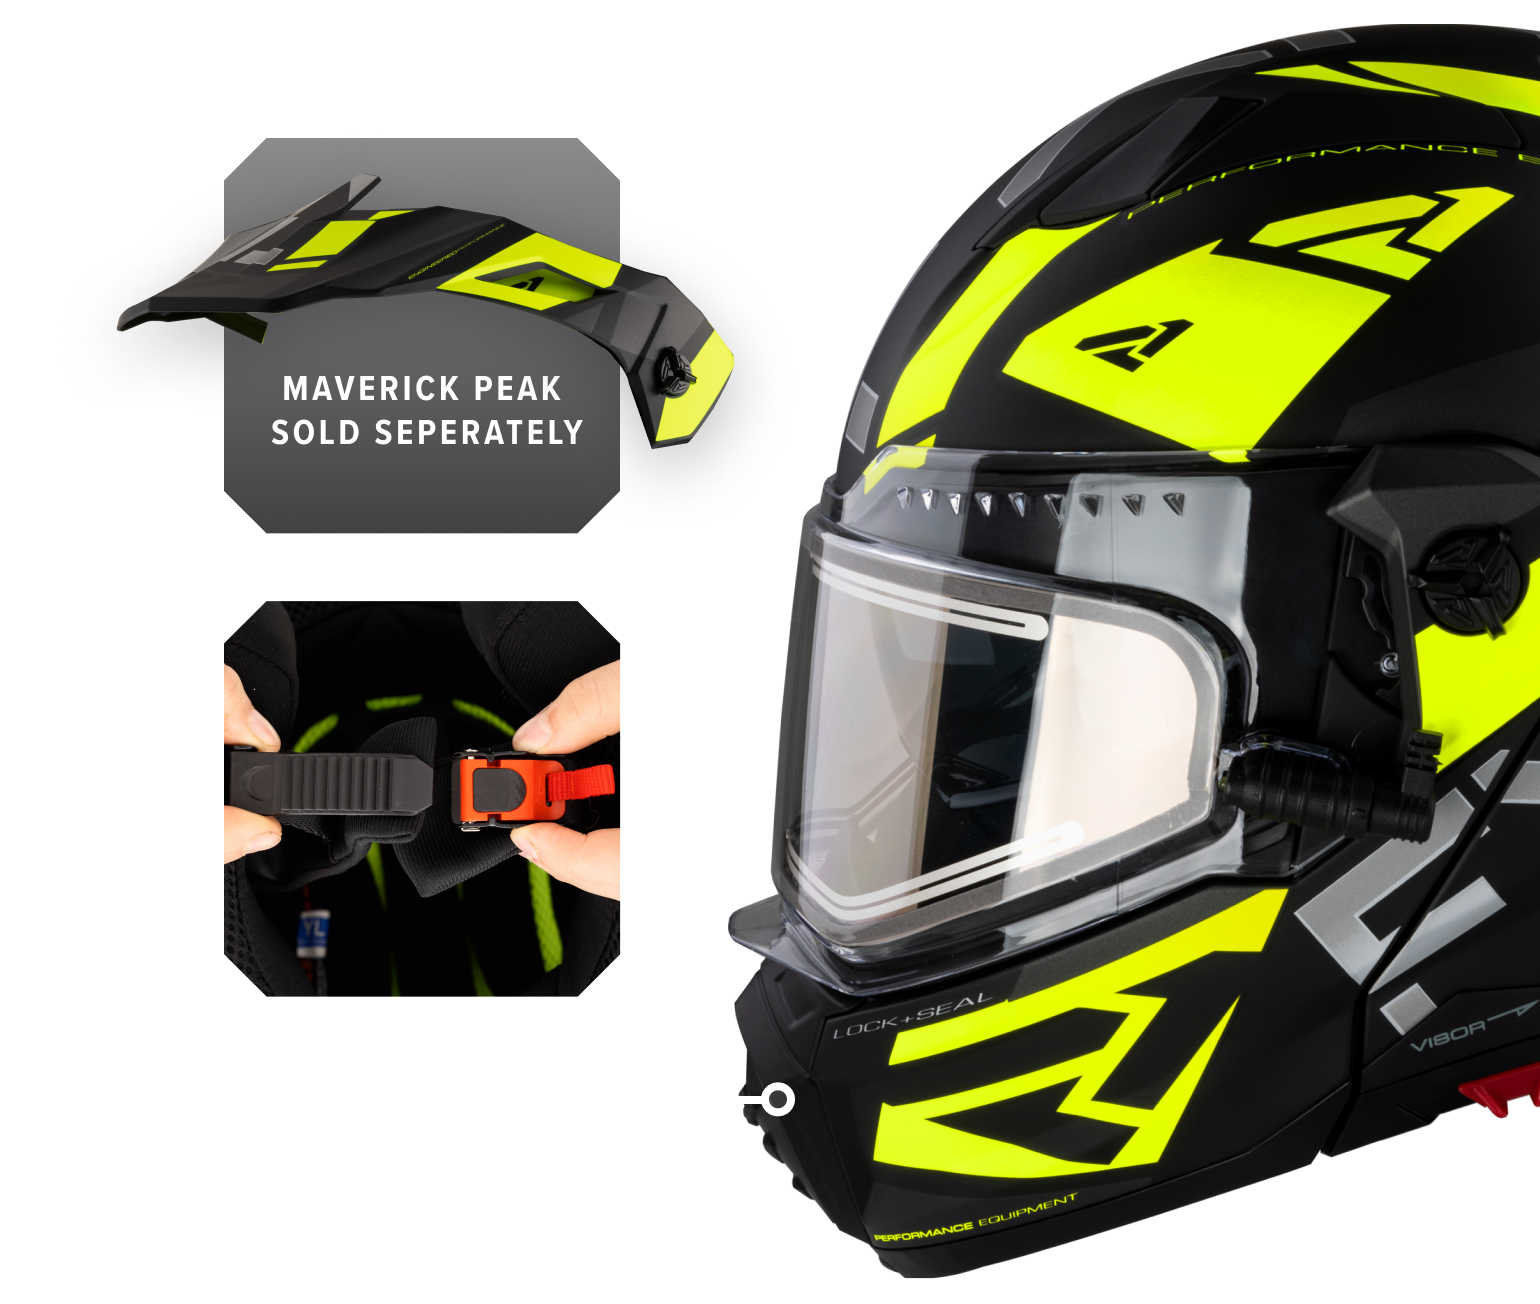 A left-side view image of Maverick Speed helmet featuring the quick-release, easy adjust buckle and showing the peak is sold seperately